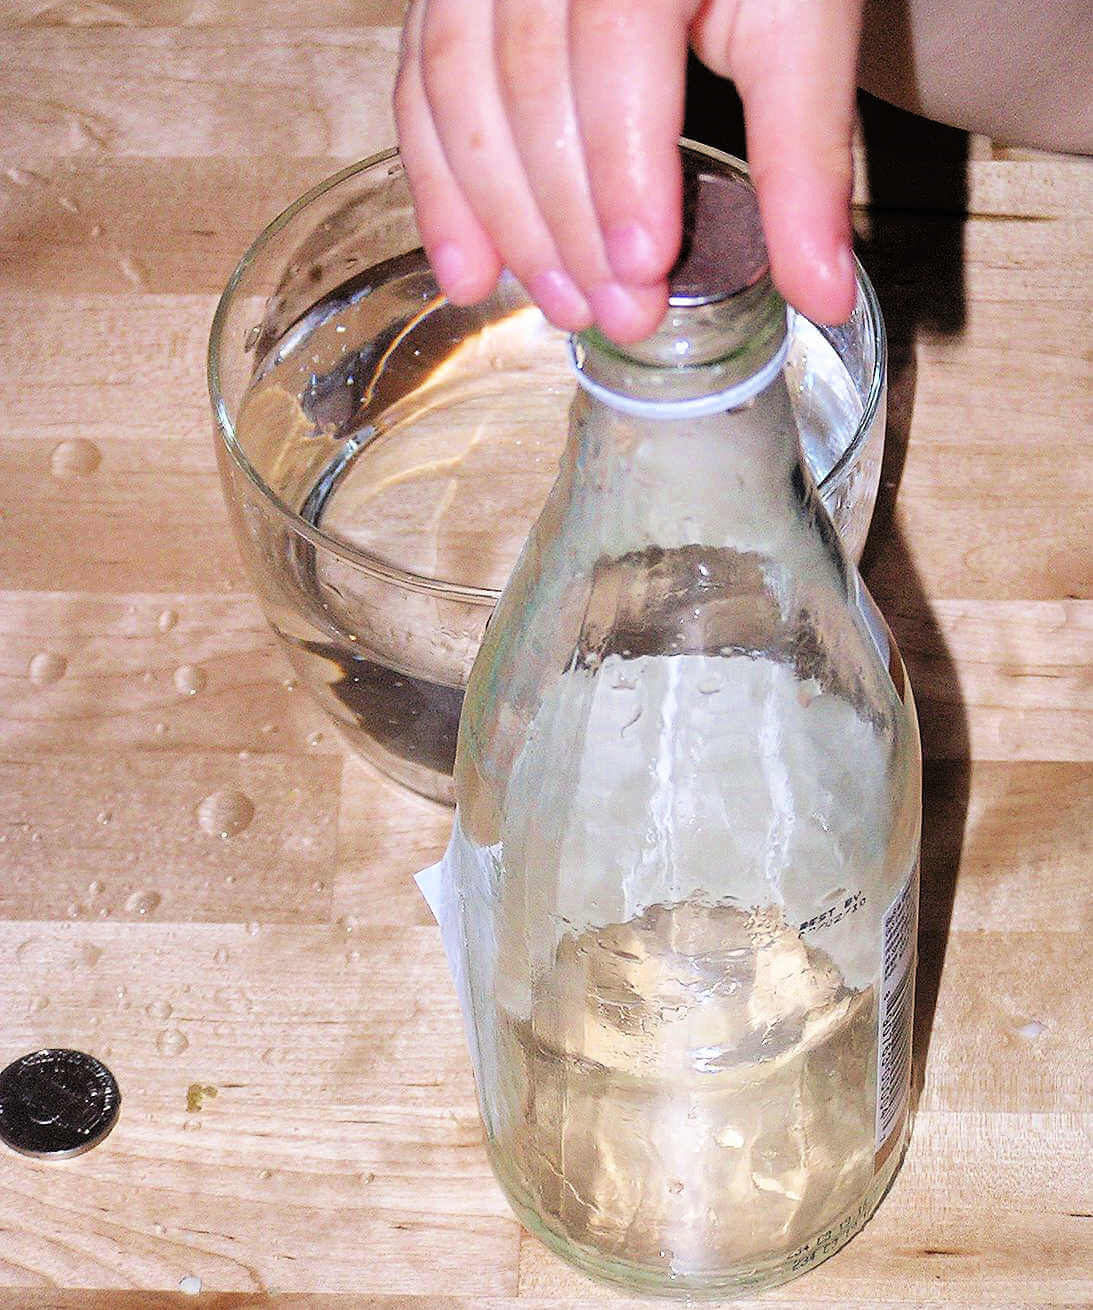 Child hand placing coin on the top of a glass bottle partially filled with water